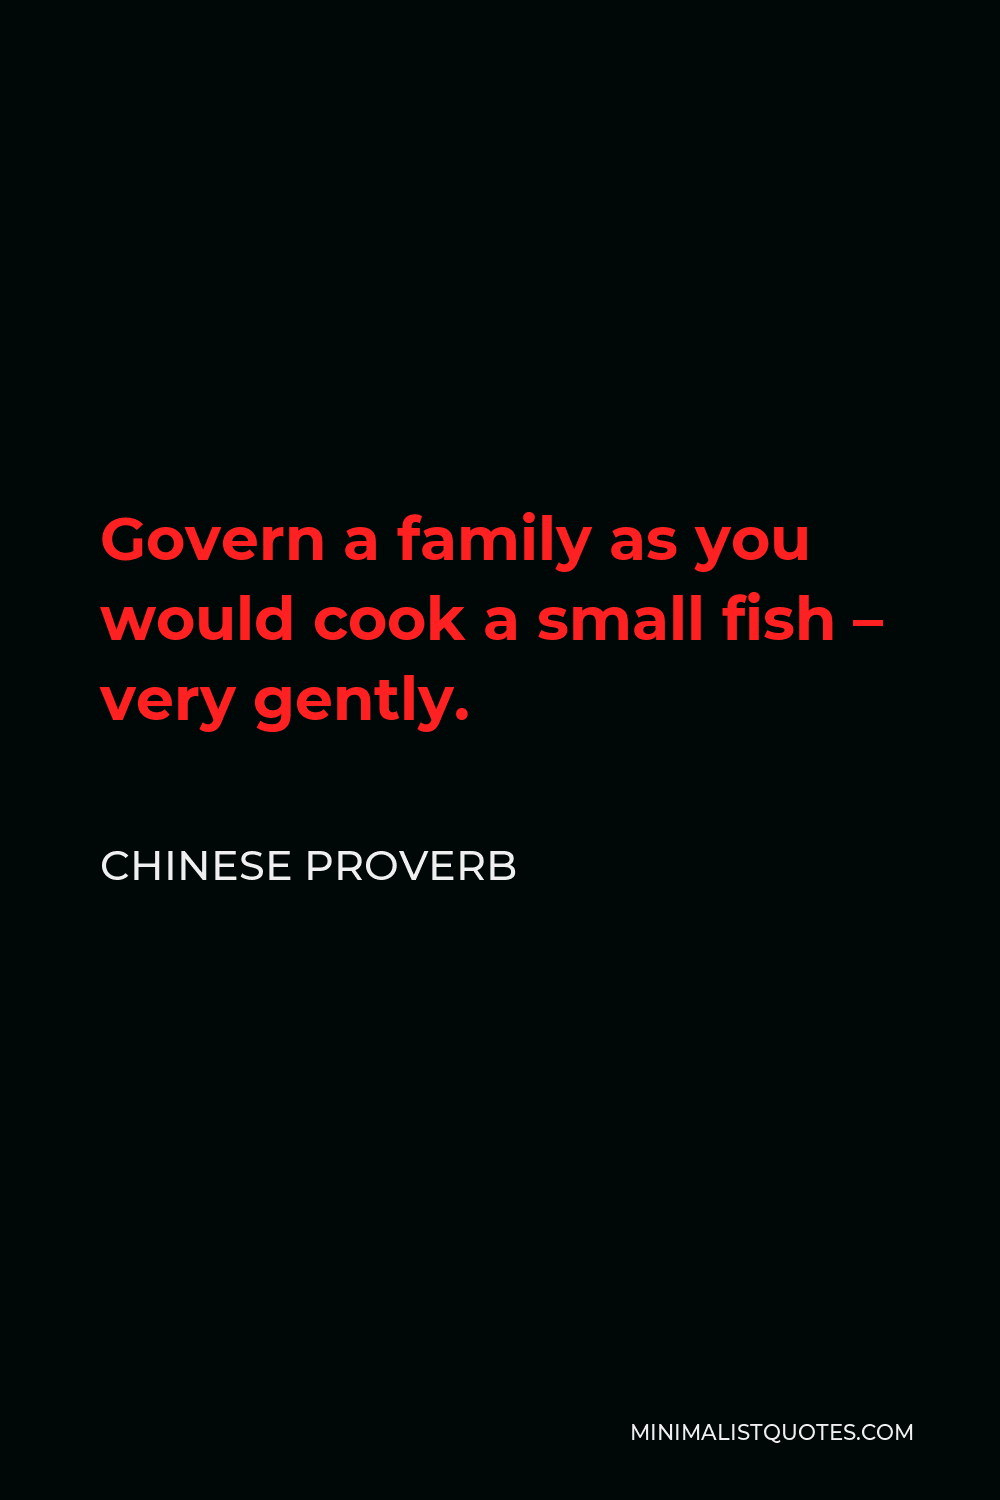 Chinese Proverb Quote - Govern a family as you would cook a small fish – very gently.